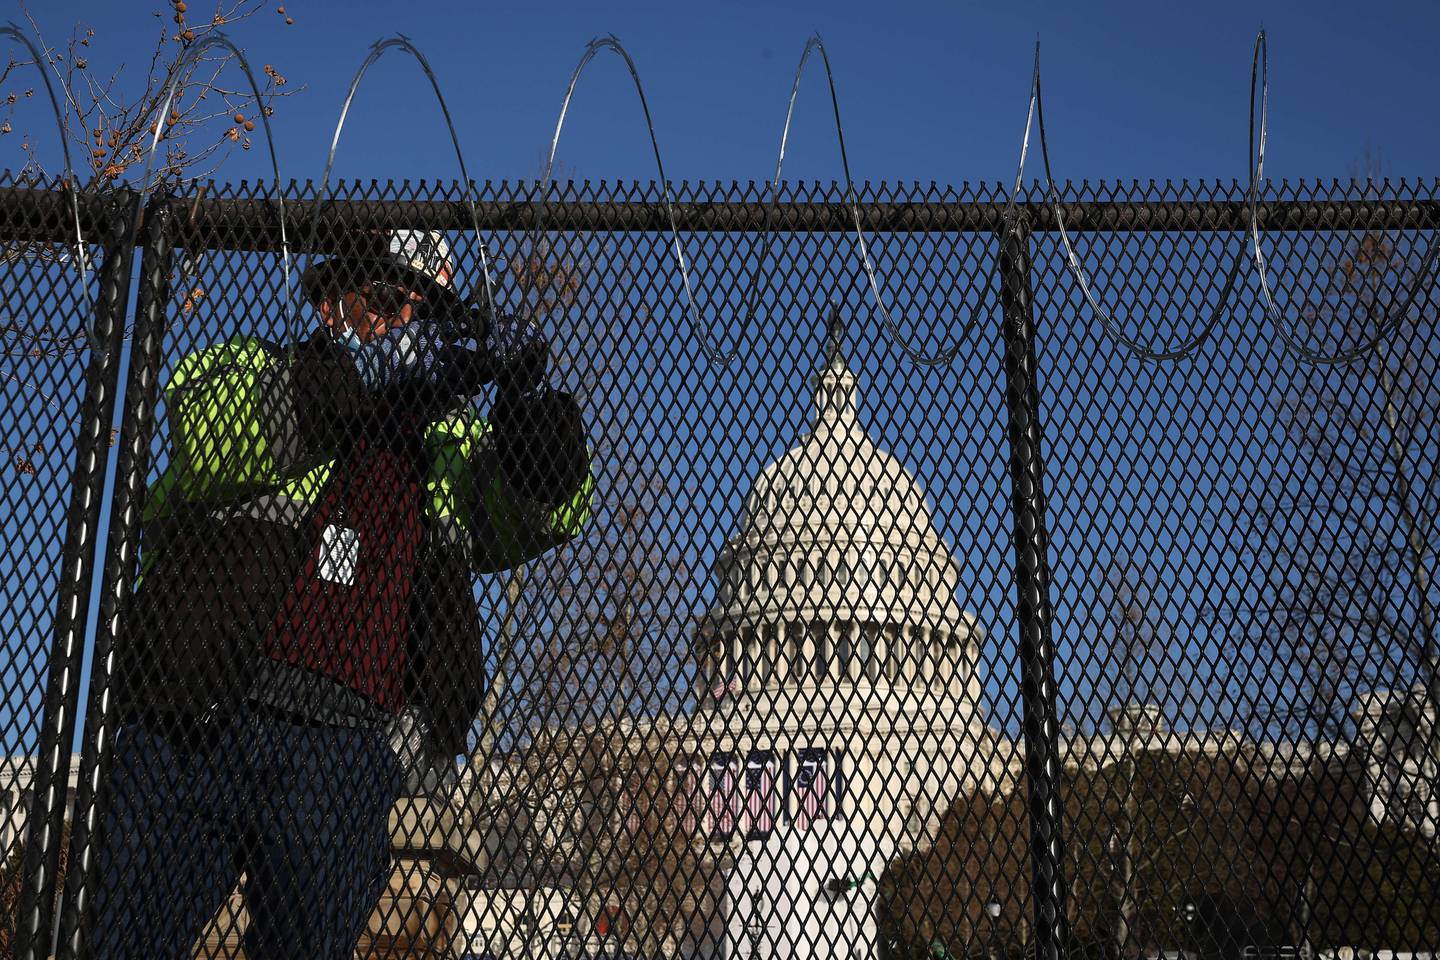 WASHINGTON, DC - JANUARY 14: Workers put concertina razor wire along the top of the 8-foot 'non-scalable' fence that surrounds the U.S. Capitol the day after the House of Representatives voted to impeach President Donald Trump for the second time January 14, 2021 in Washington, DC. Thousands of National Guard troops have been activated to protect the nation's capital against threats surrounding President-elect Joe Biden�s inauguration and to prevent a repeat of last week�s deadly insurrection at the U.S. Capitol.   Chip Somodevilla/Getty Images/AFP
== FOR NEWSPAPERS, INTERNET, TELCOS & TELEVISION USE ONLY ==